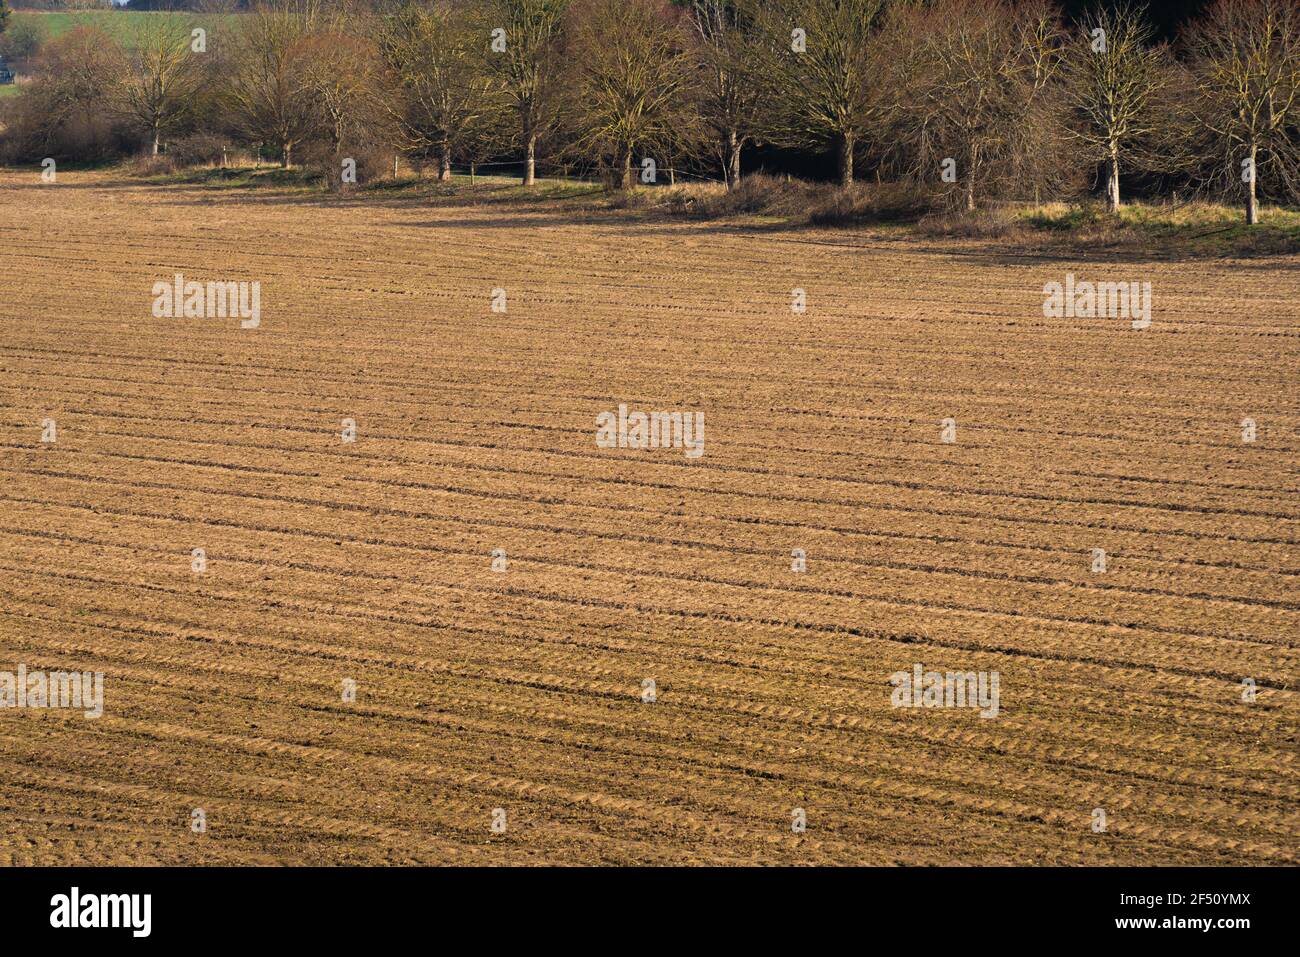 Ploughed field, patterns, straight furrows, ground, seedbed, soil, sown, tilled, farming, artistic lines, planting, cultivation, ploughing, seed lines Stock Photo